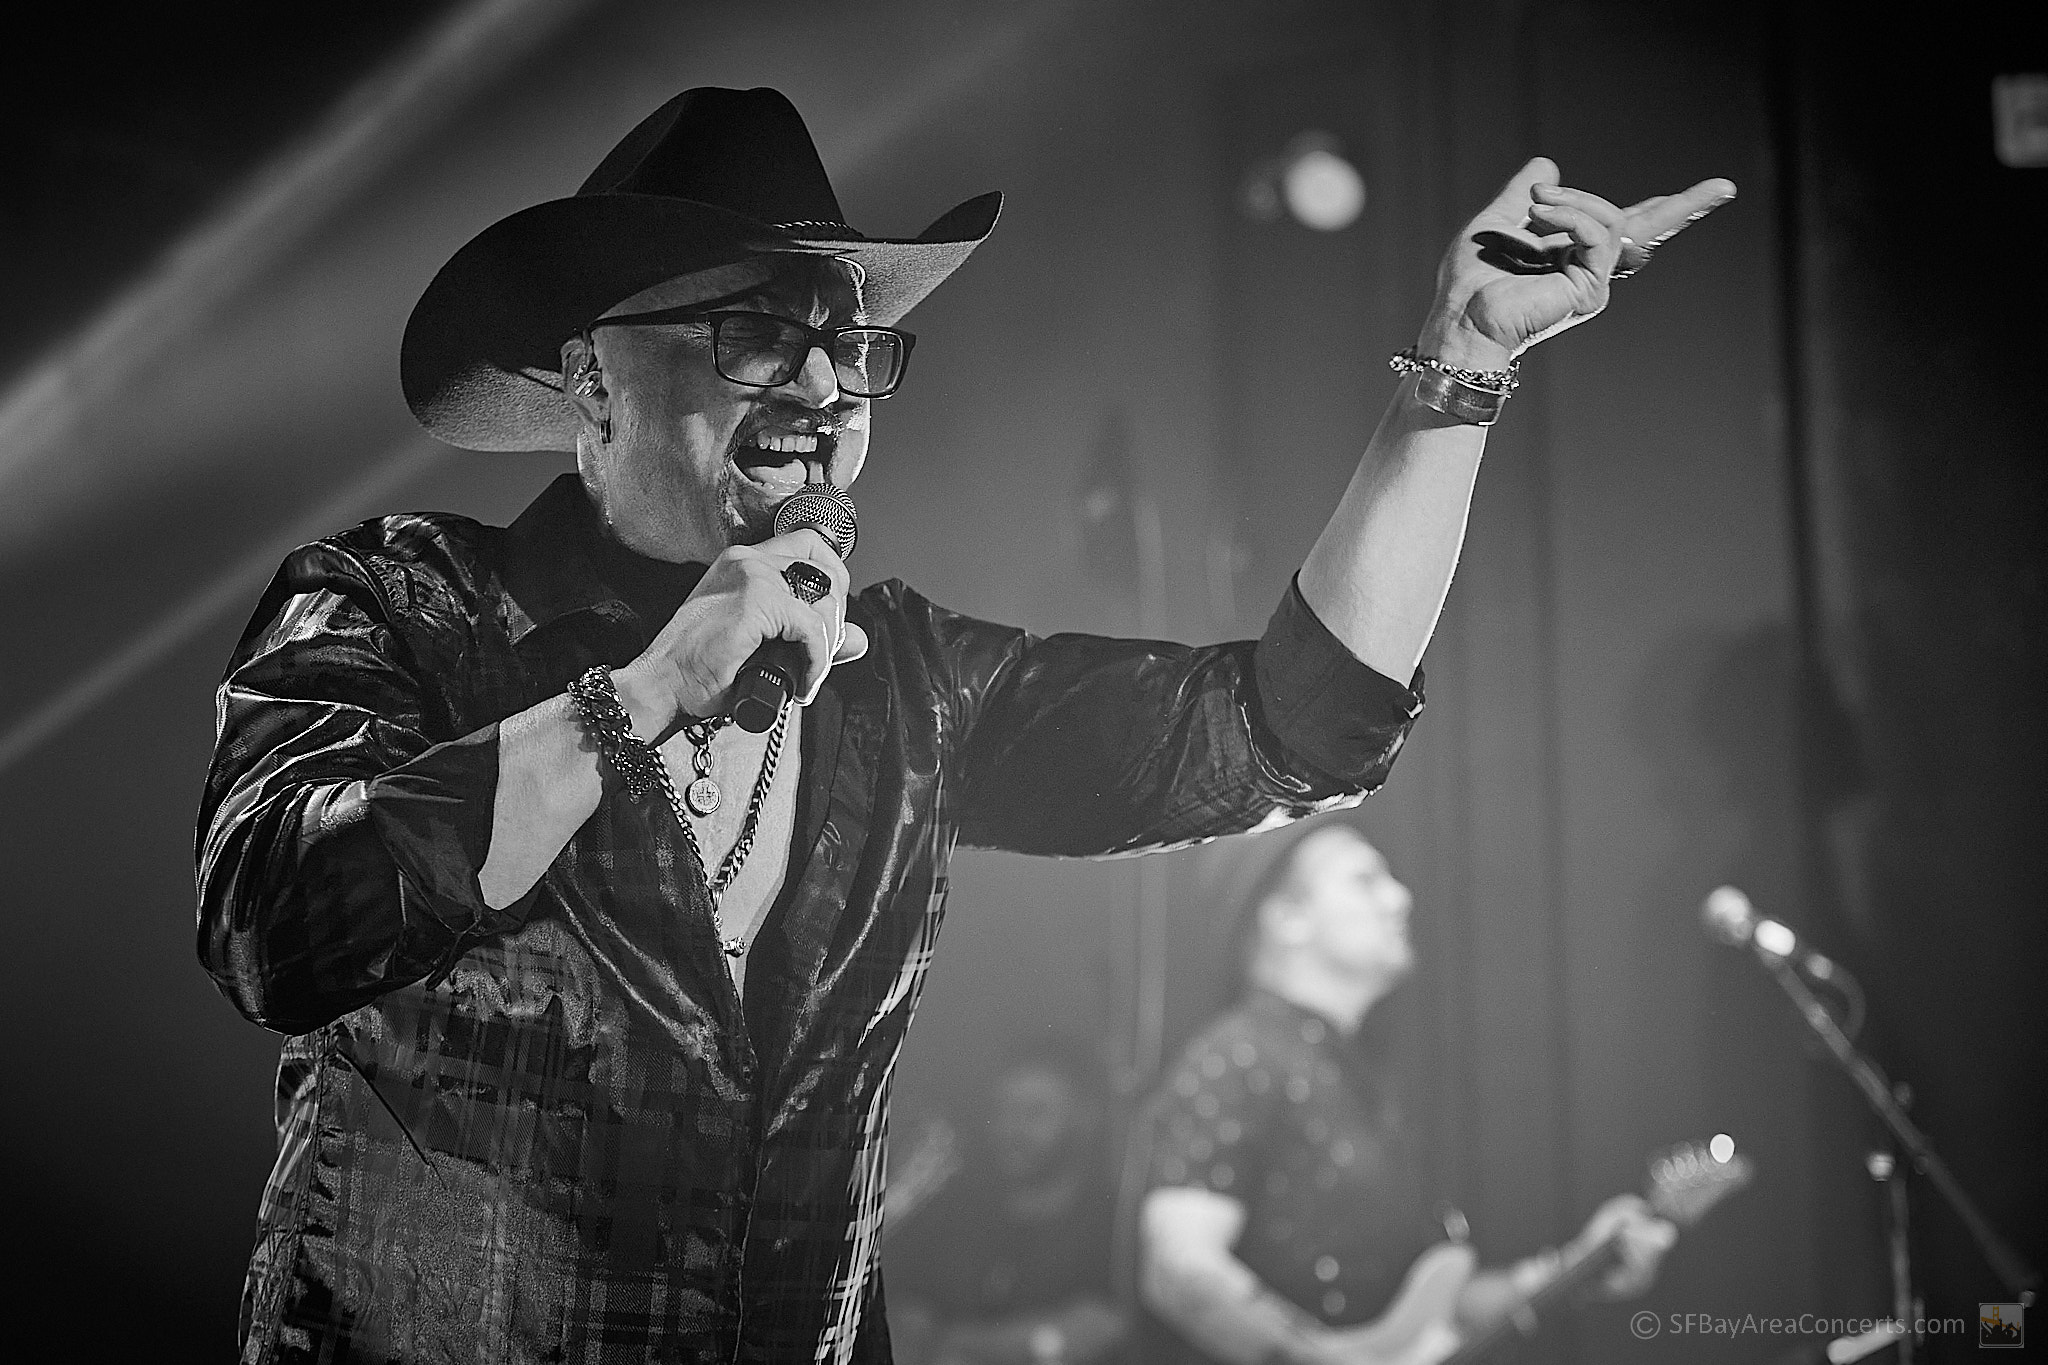 Geoff Tate @ the Ritz (Photo: Kevin Keating)